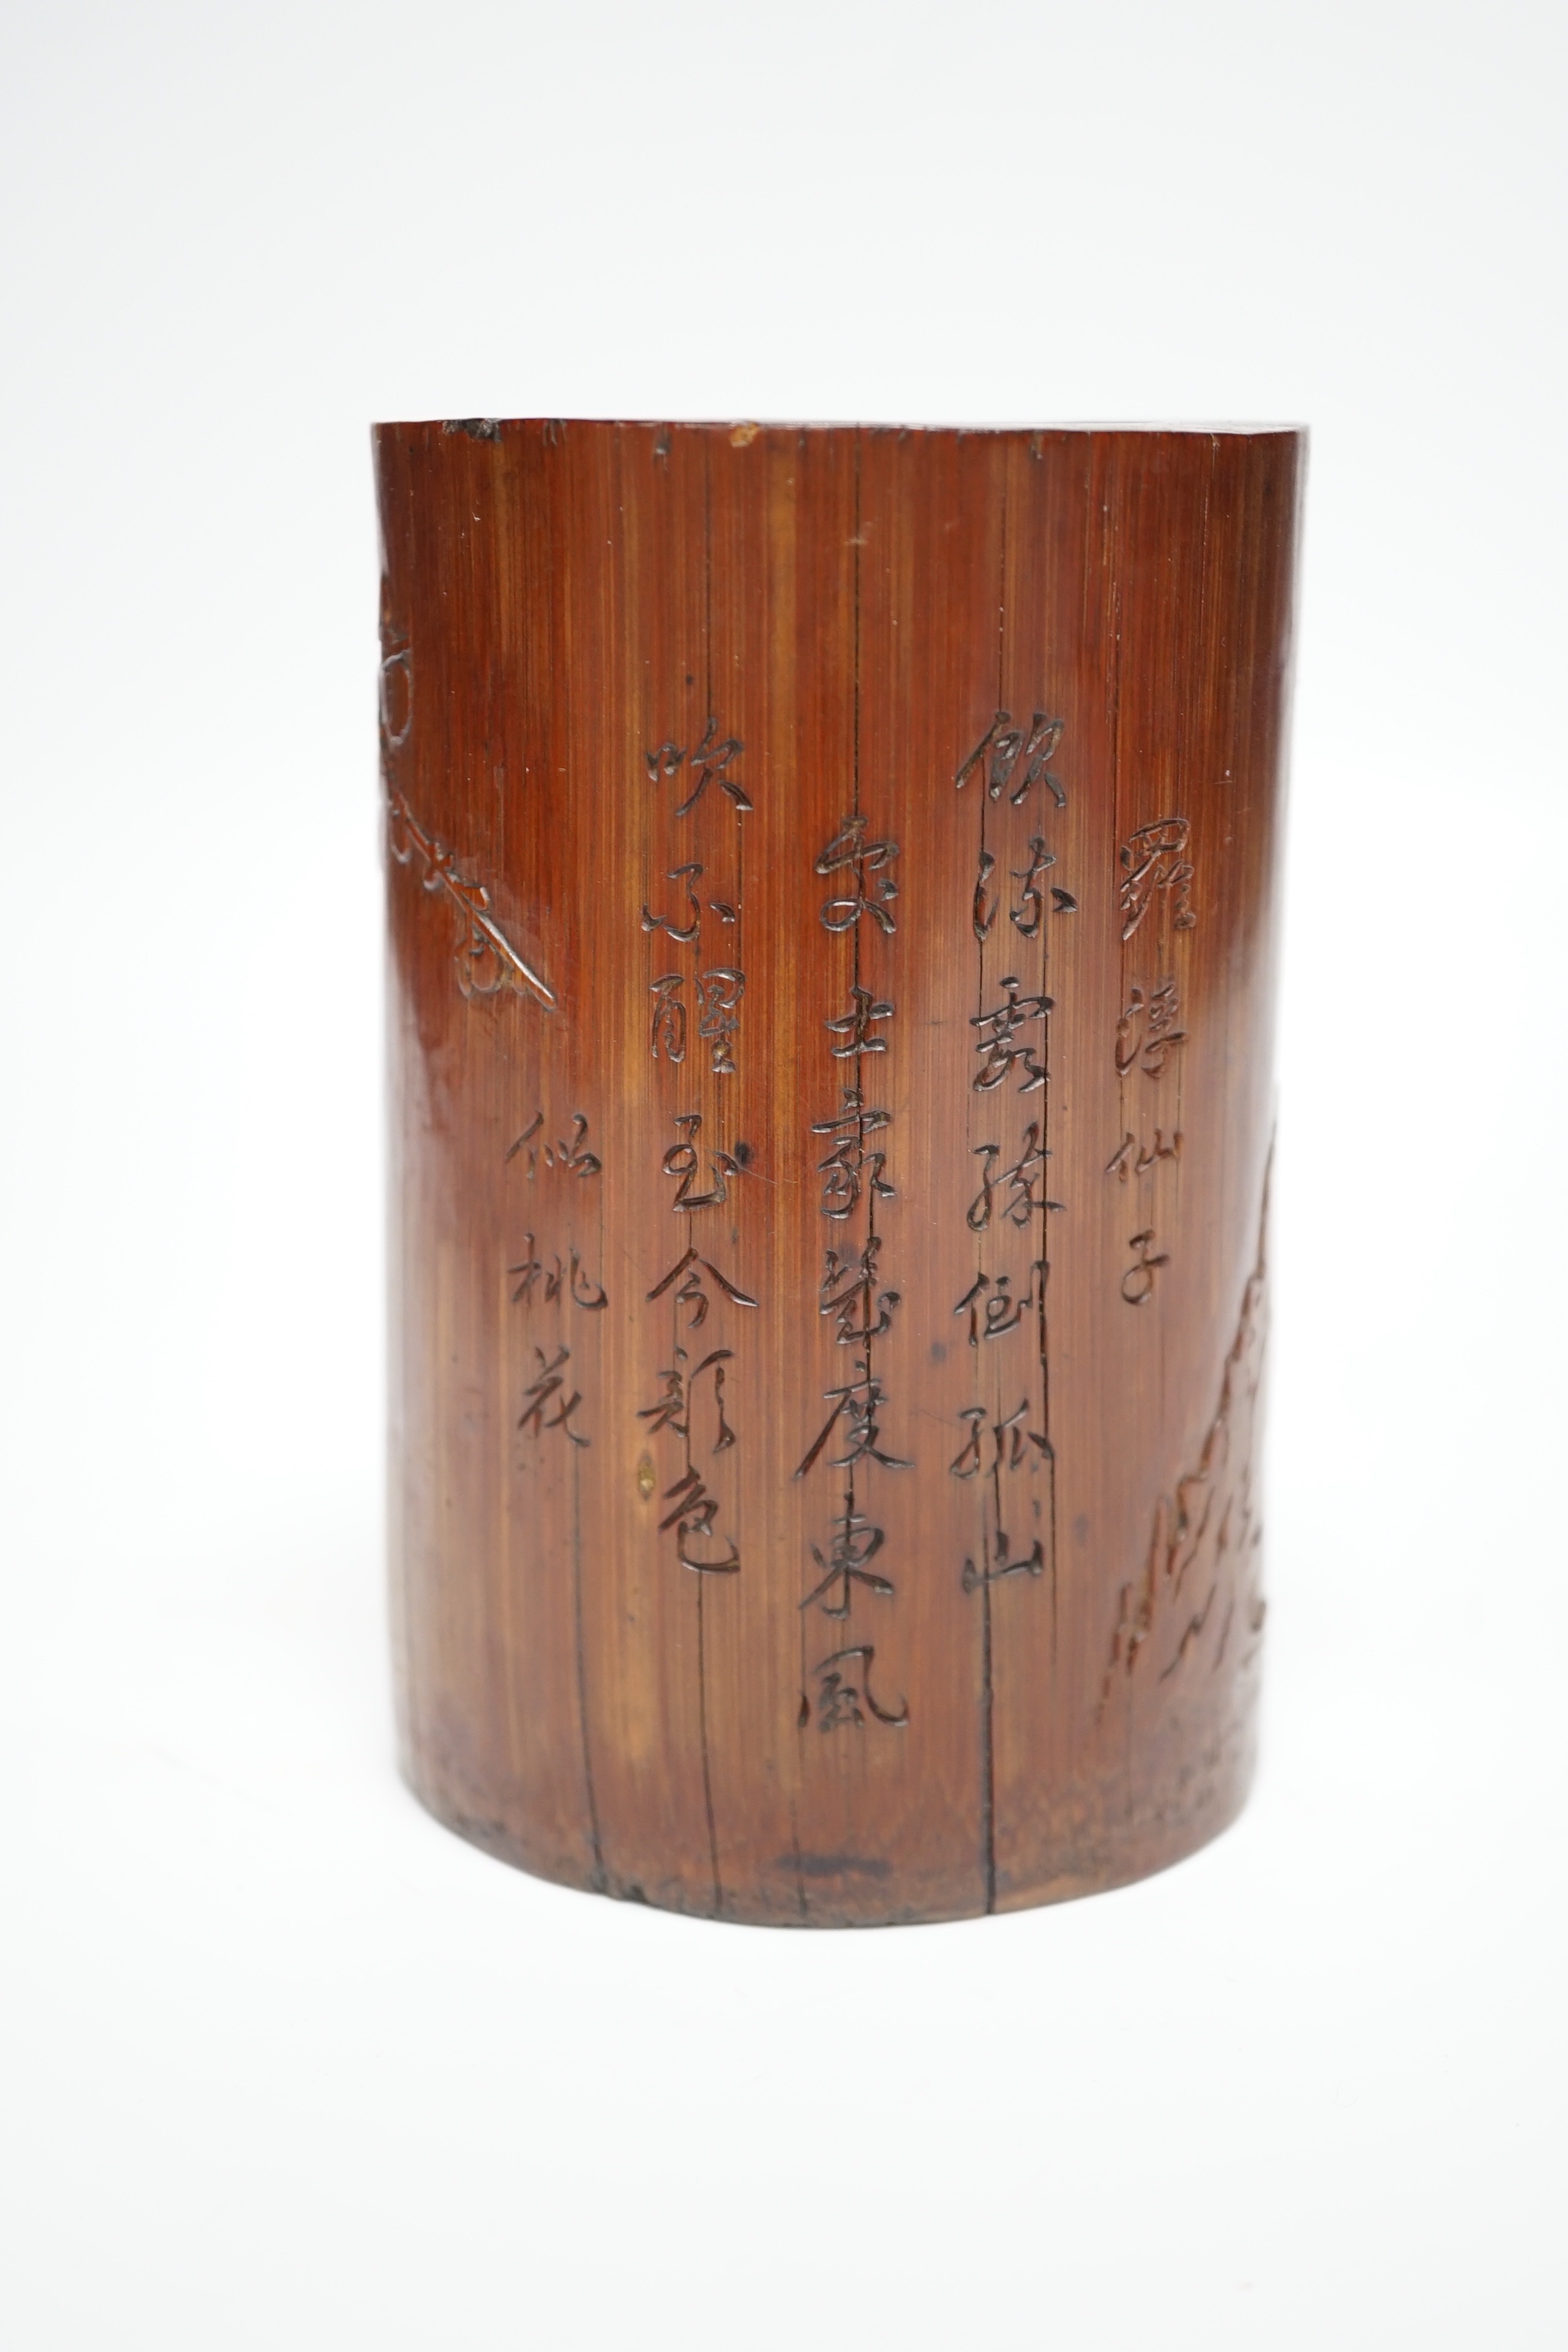 A 19th century Chinese Daoist bamboo brushpot, inscribed with a poem, 13cm high